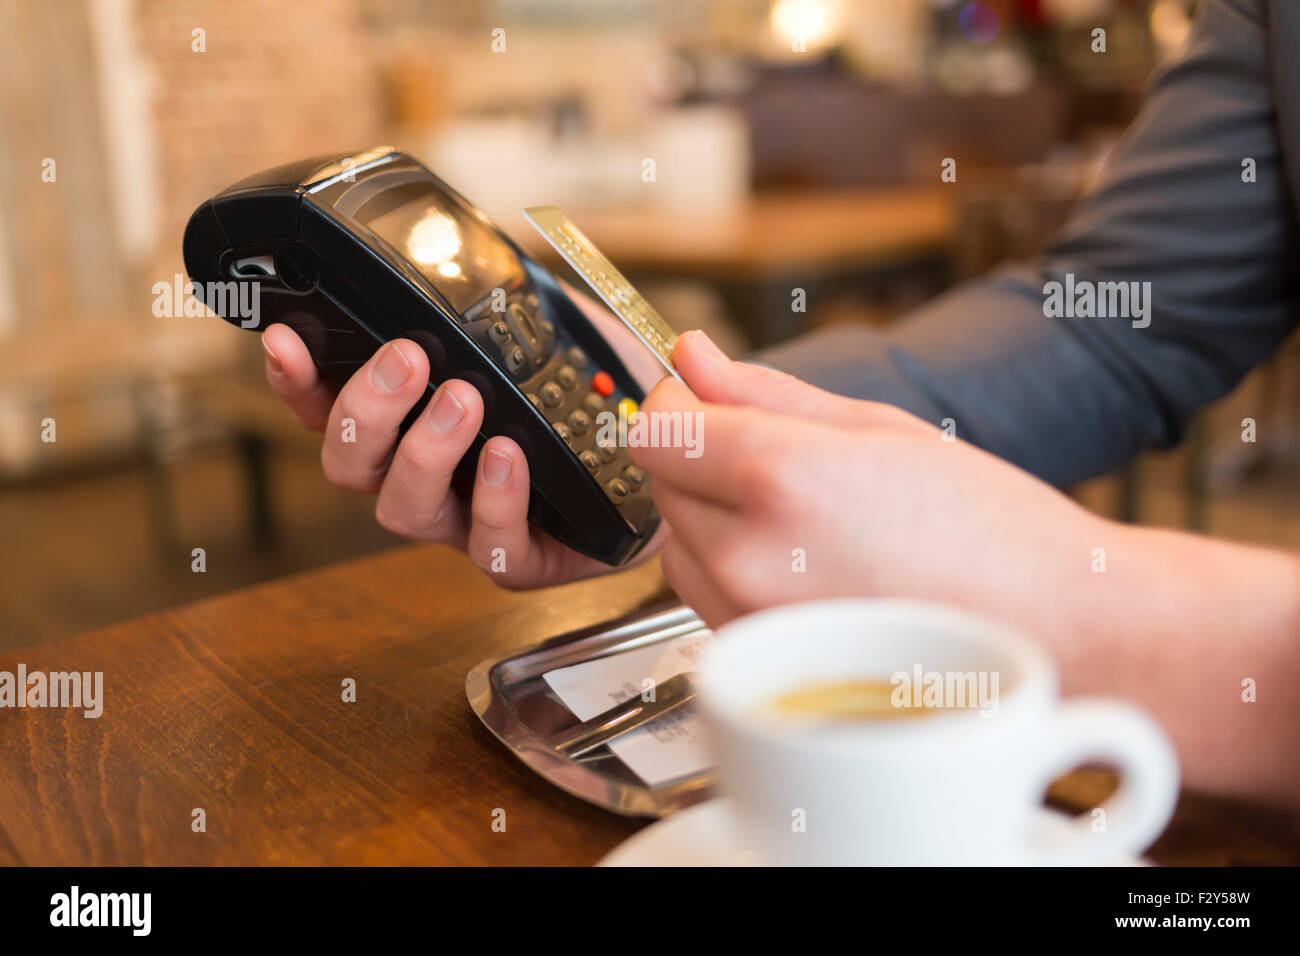 Man paying with NFC technology , credit card, in restaurant, bar, cafe Stock Photo